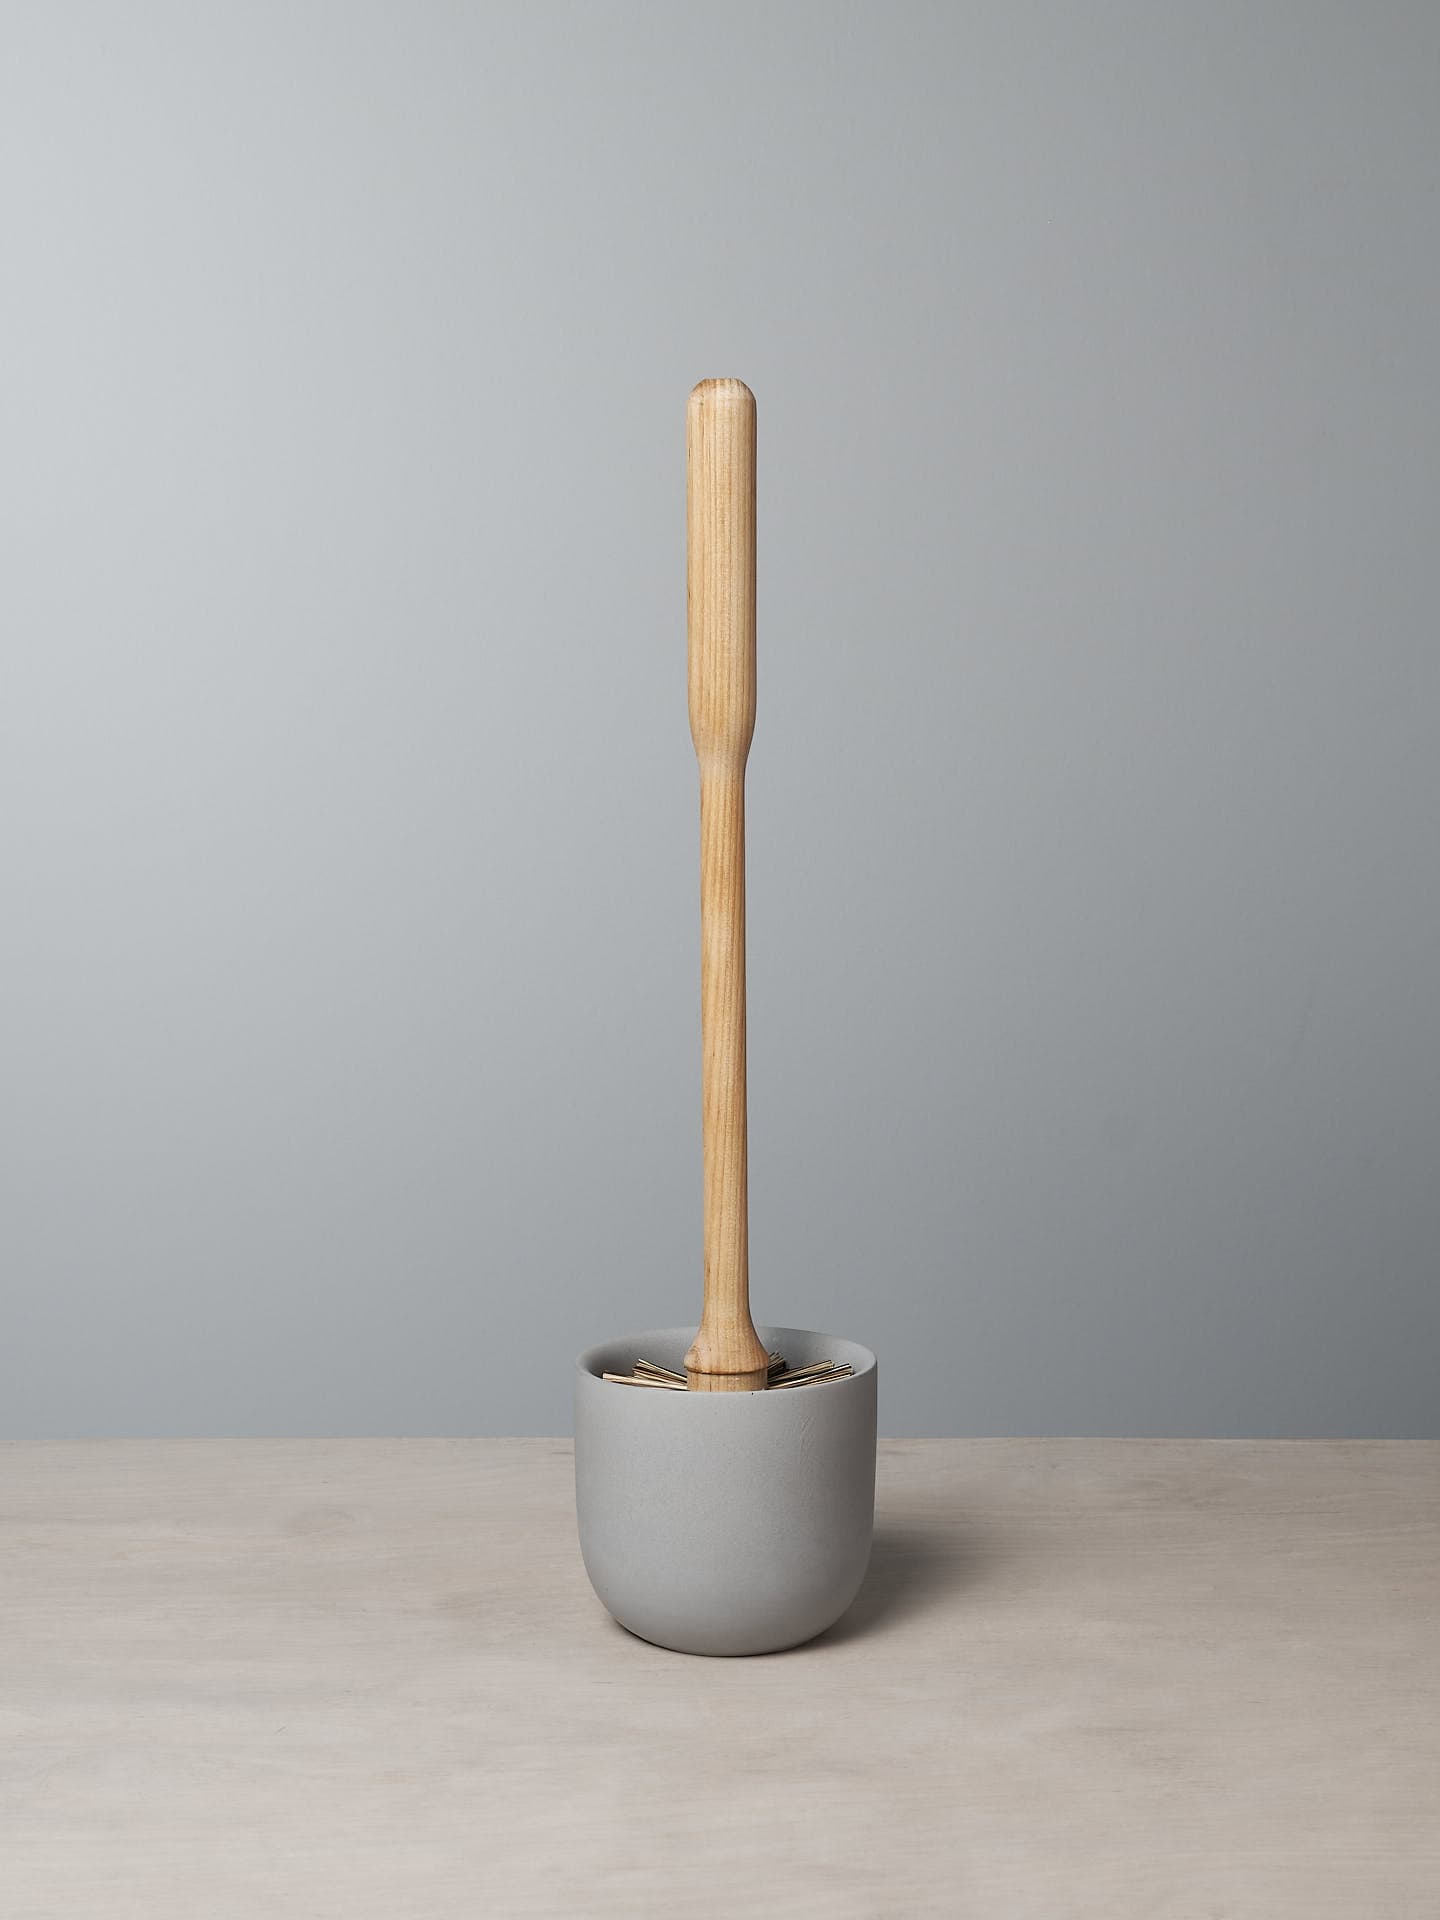 An Iris Hantverk Toilet Brush with Concrete Cup stands upright in a gray polymer mix concrete holder on a light wood surface against a plain gray wall.